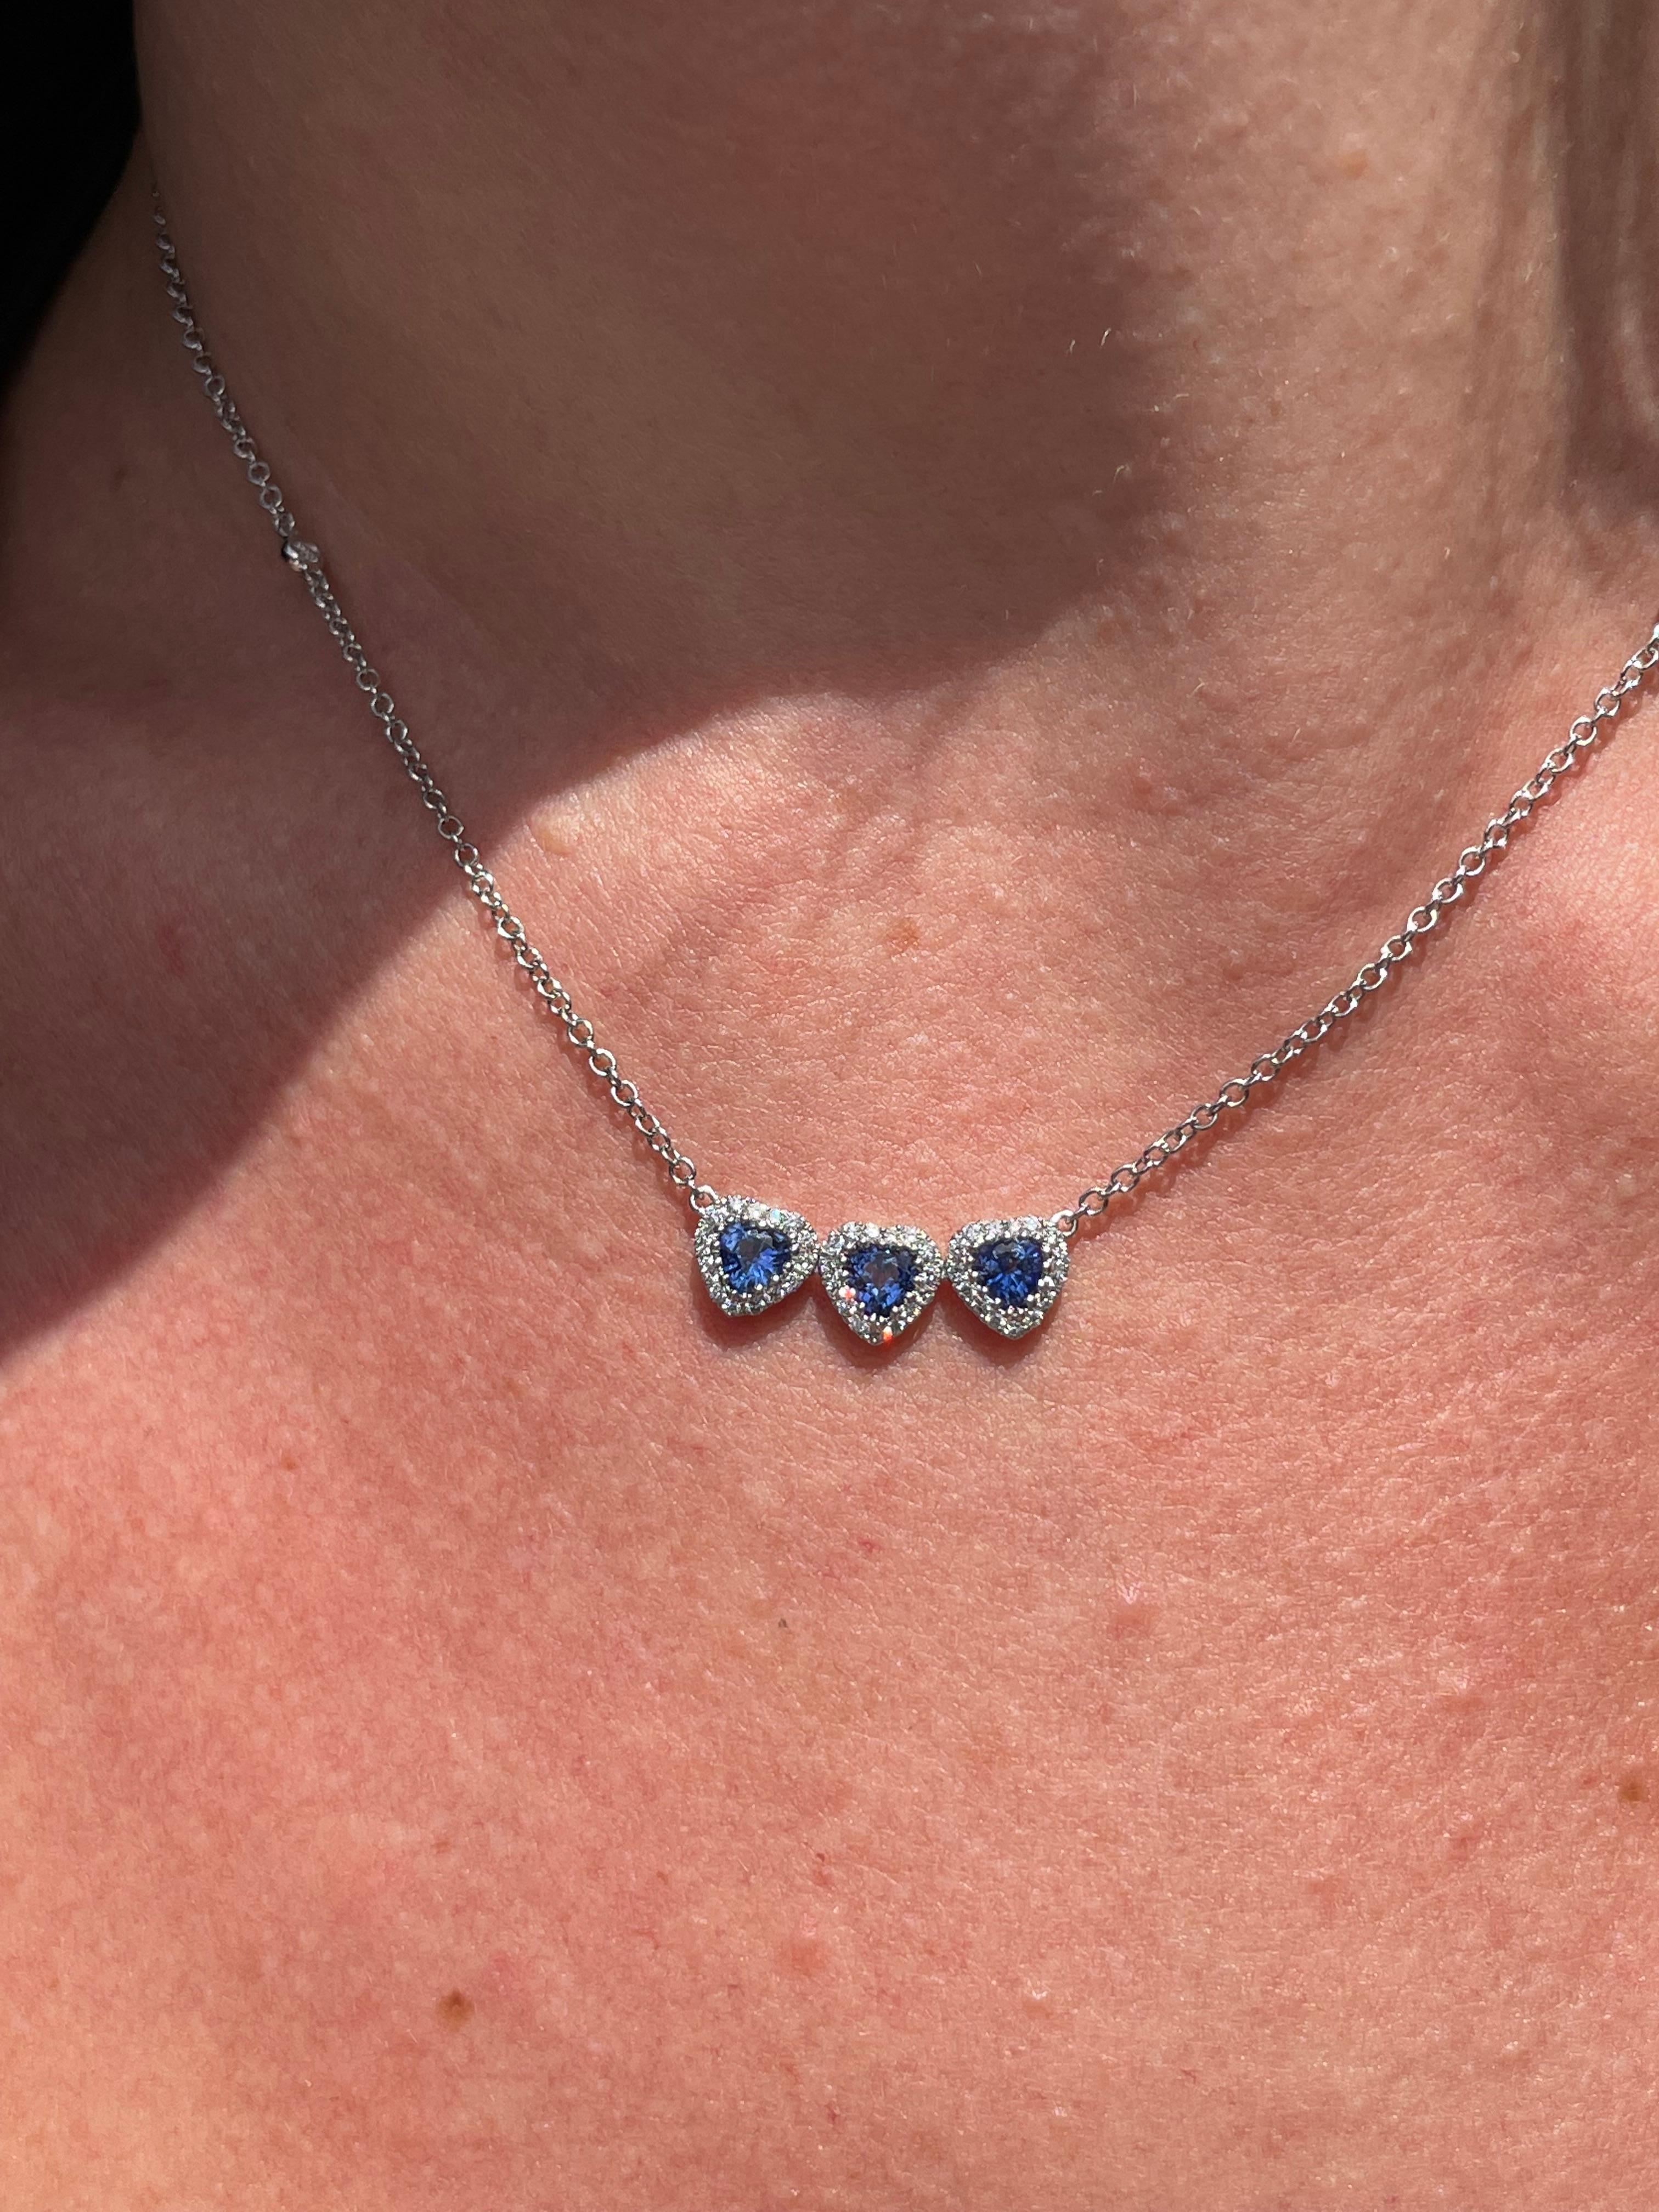 18 karat white gold necklace with a triple heart motif pendant. It showcases 3 heart shape blue sapphires weighing a total carat weight of 0.87 carats and 49 pave diamonds weighing a total carat weight of 0.41 carats.